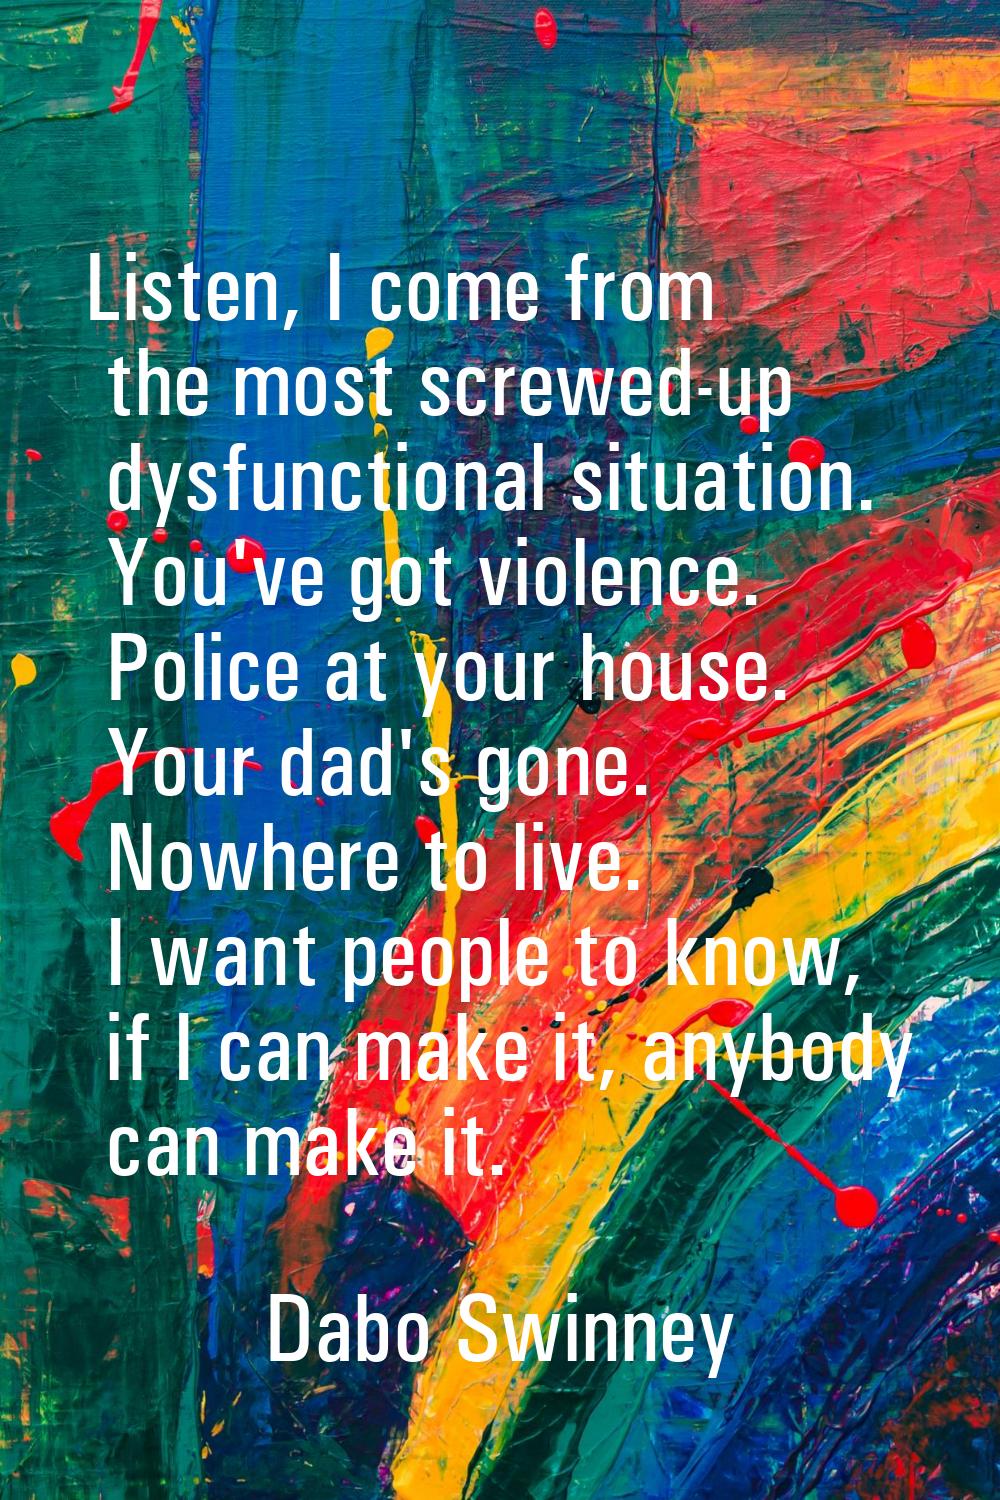 Listen, I come from the most screwed-up dysfunctional situation. You've got violence. Police at you